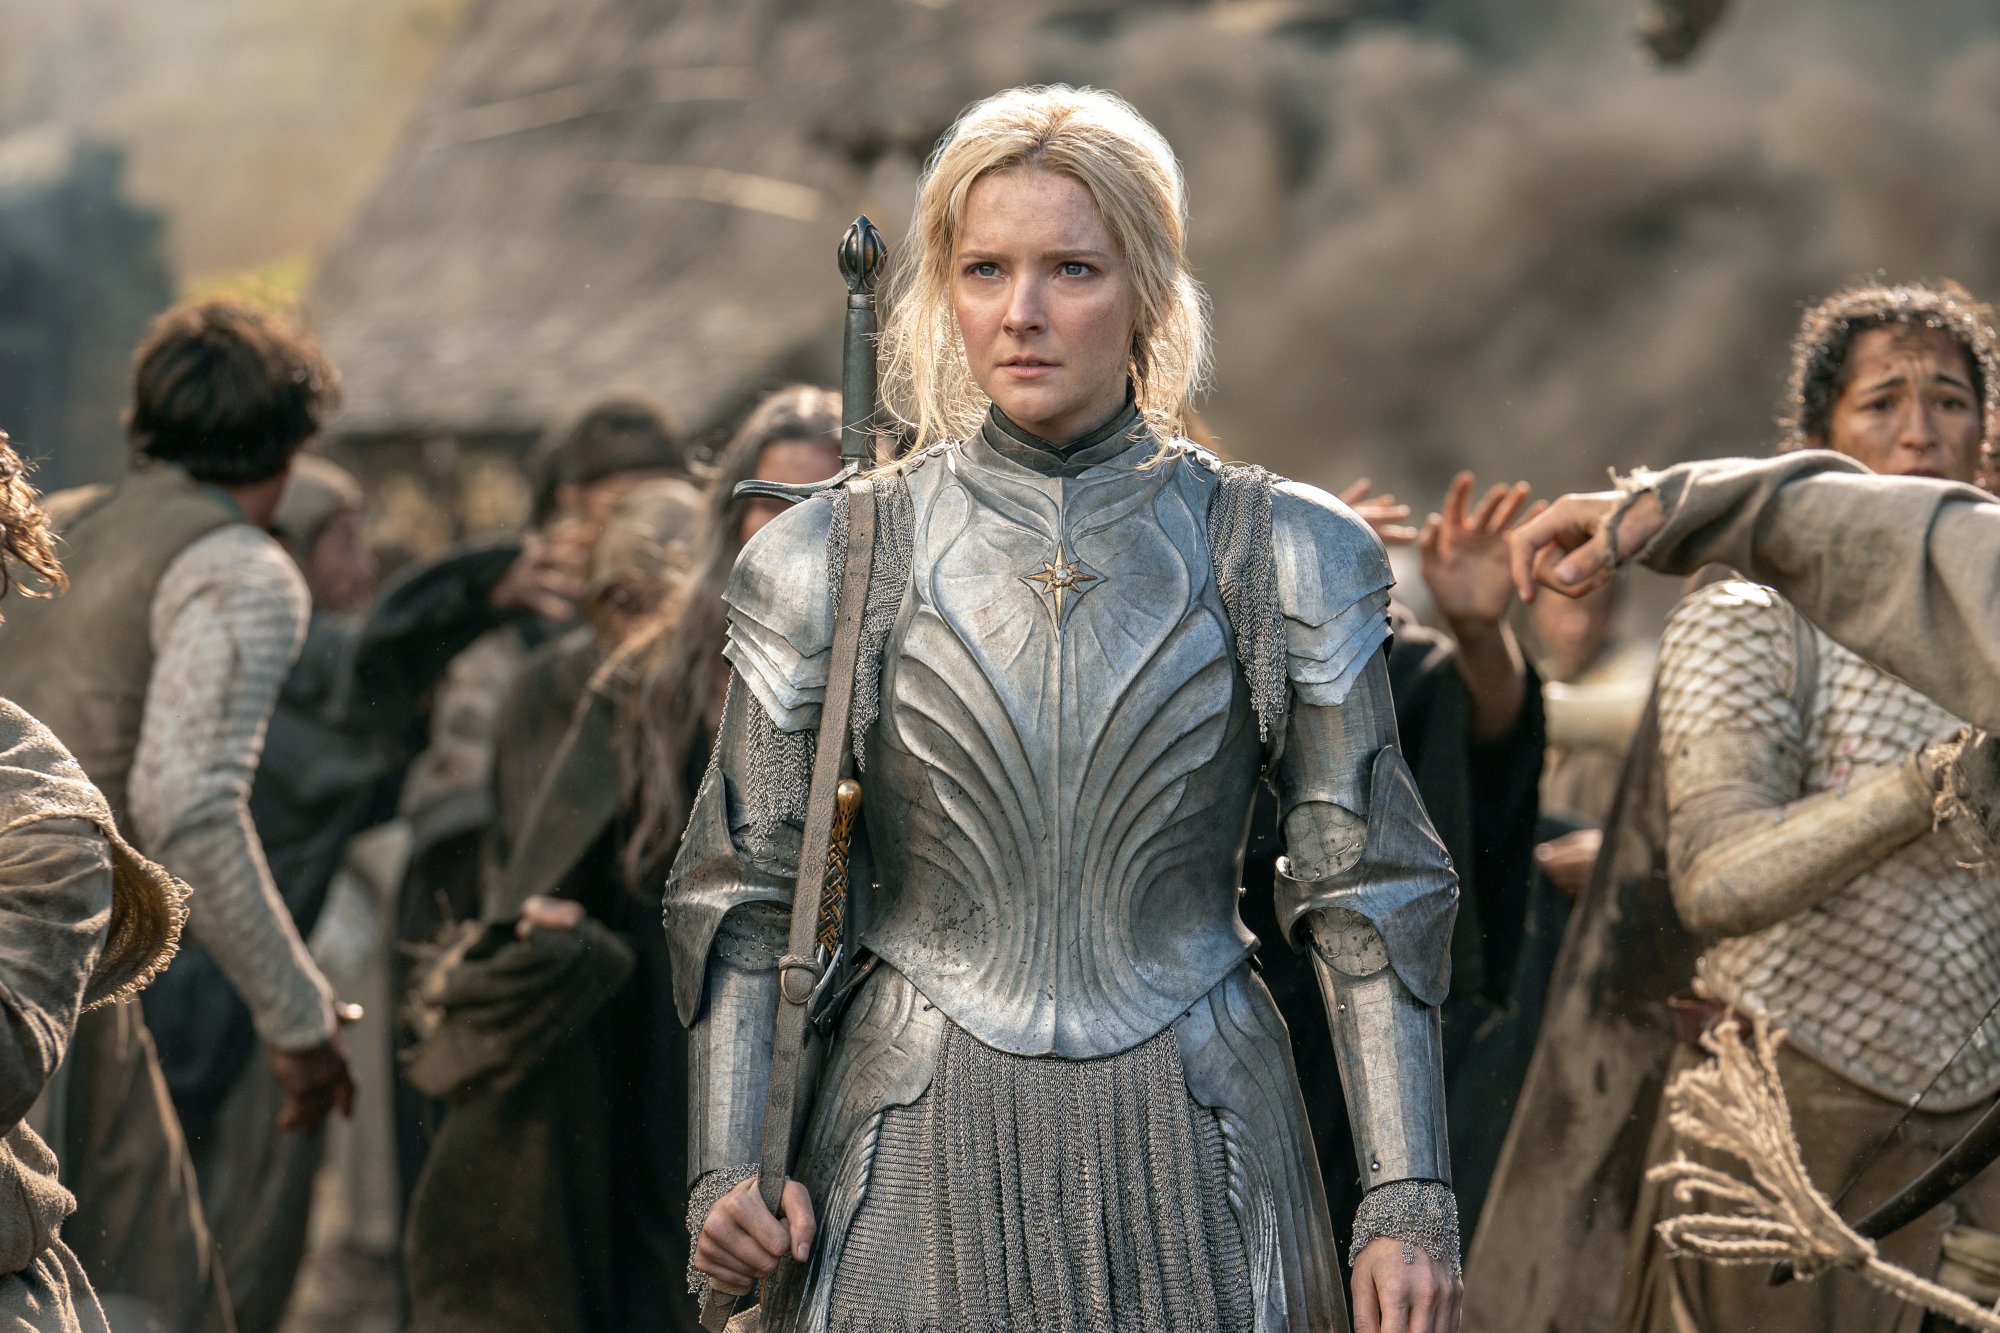 Morfydd Clark as Galadriel in 'The Lord of the Rings: The Rings of Power' for our article covering its episode count and release schedule. Her blonde hair is pulled back, and she's wearing armor.